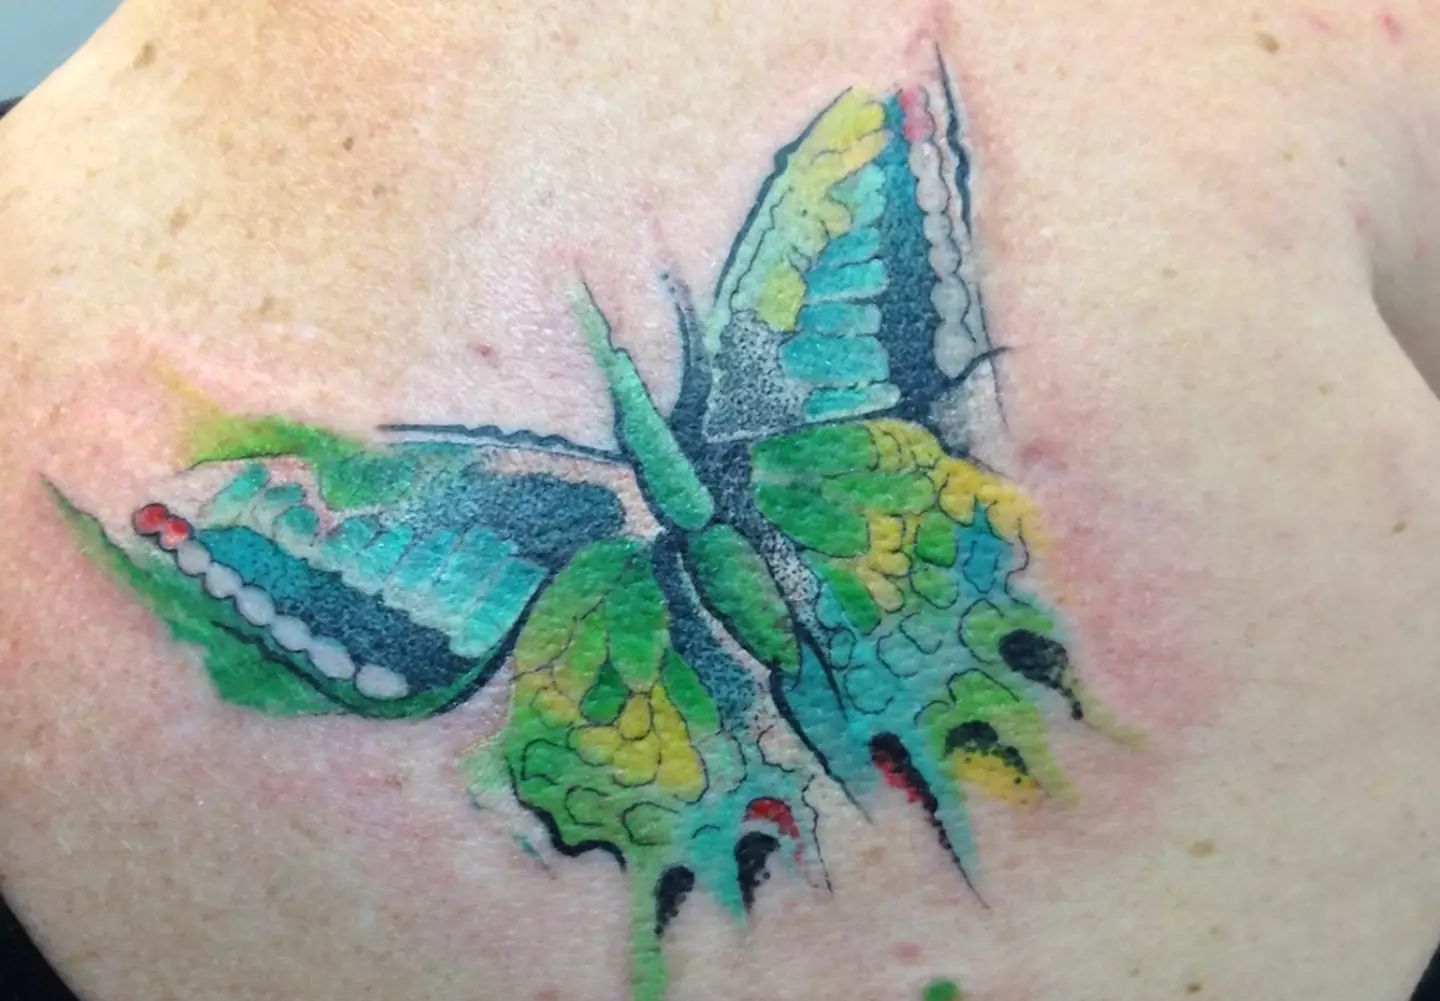 The daughter got a butterfly tattoo on her shoulder.